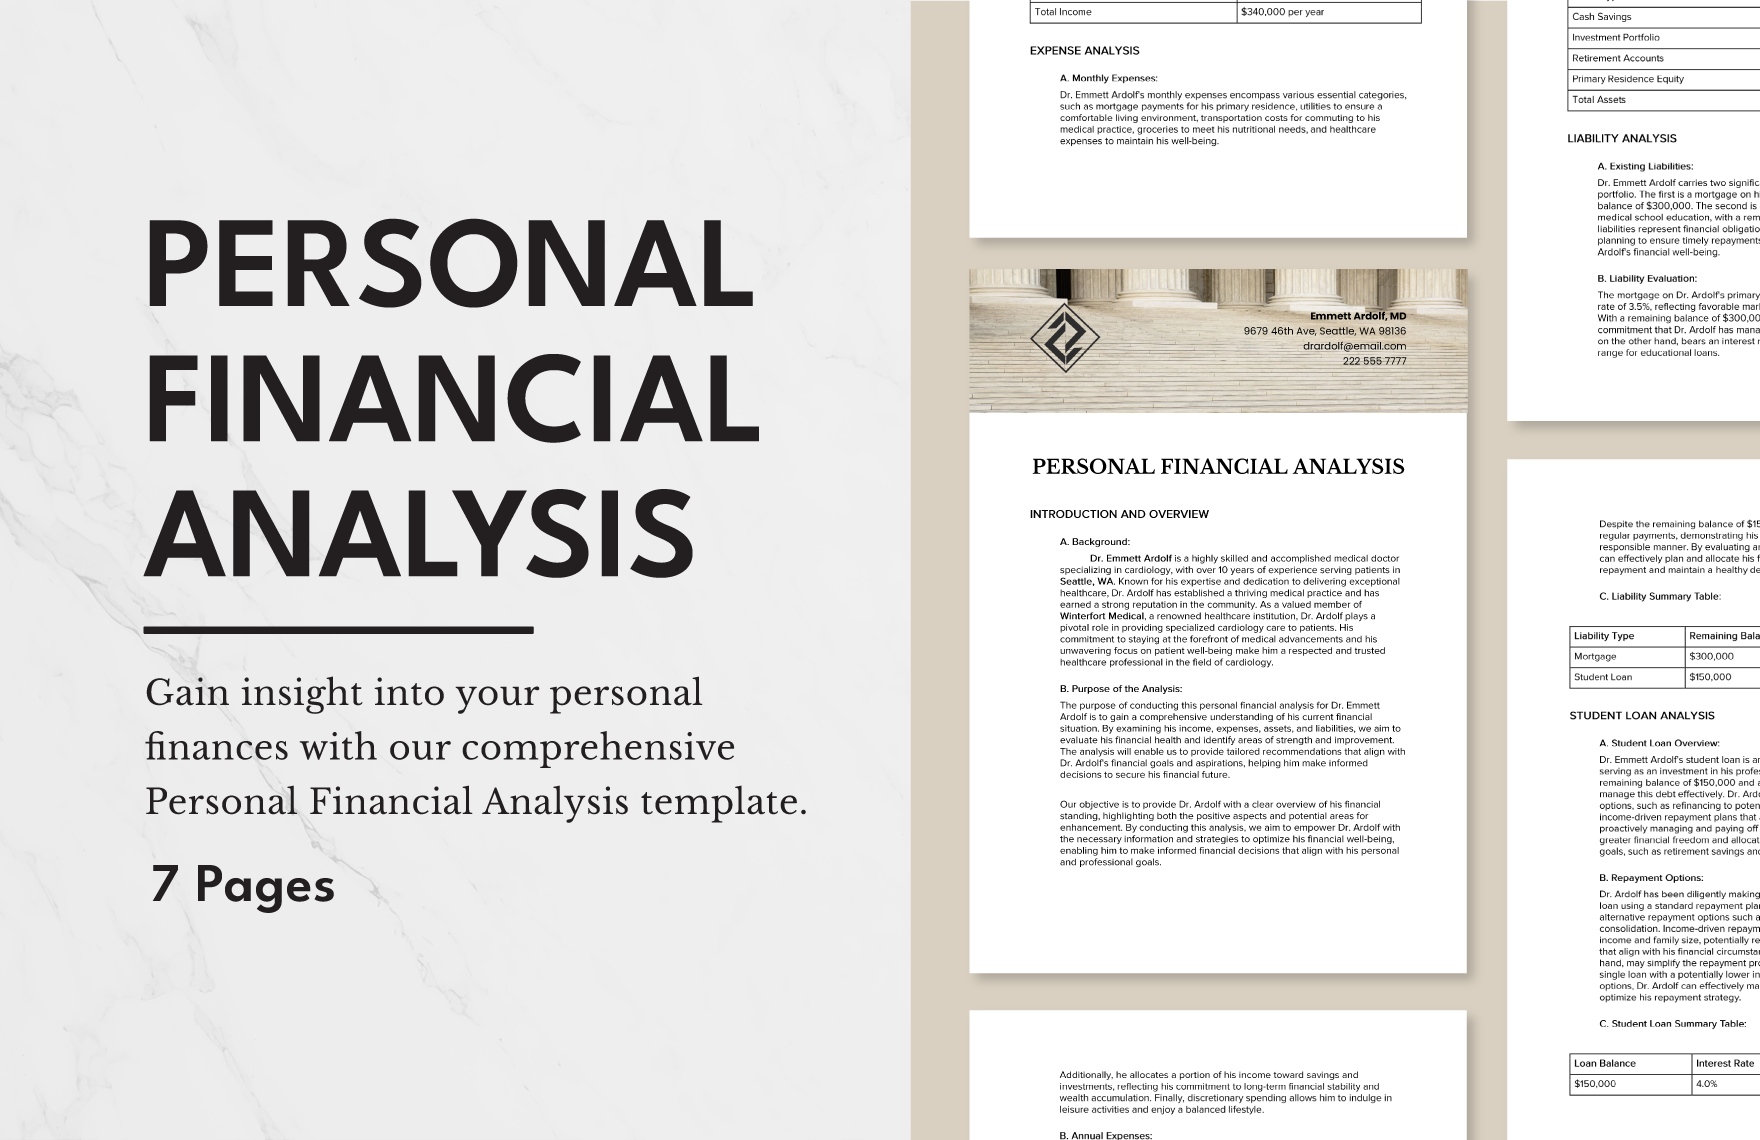 Personal Financial Analysis